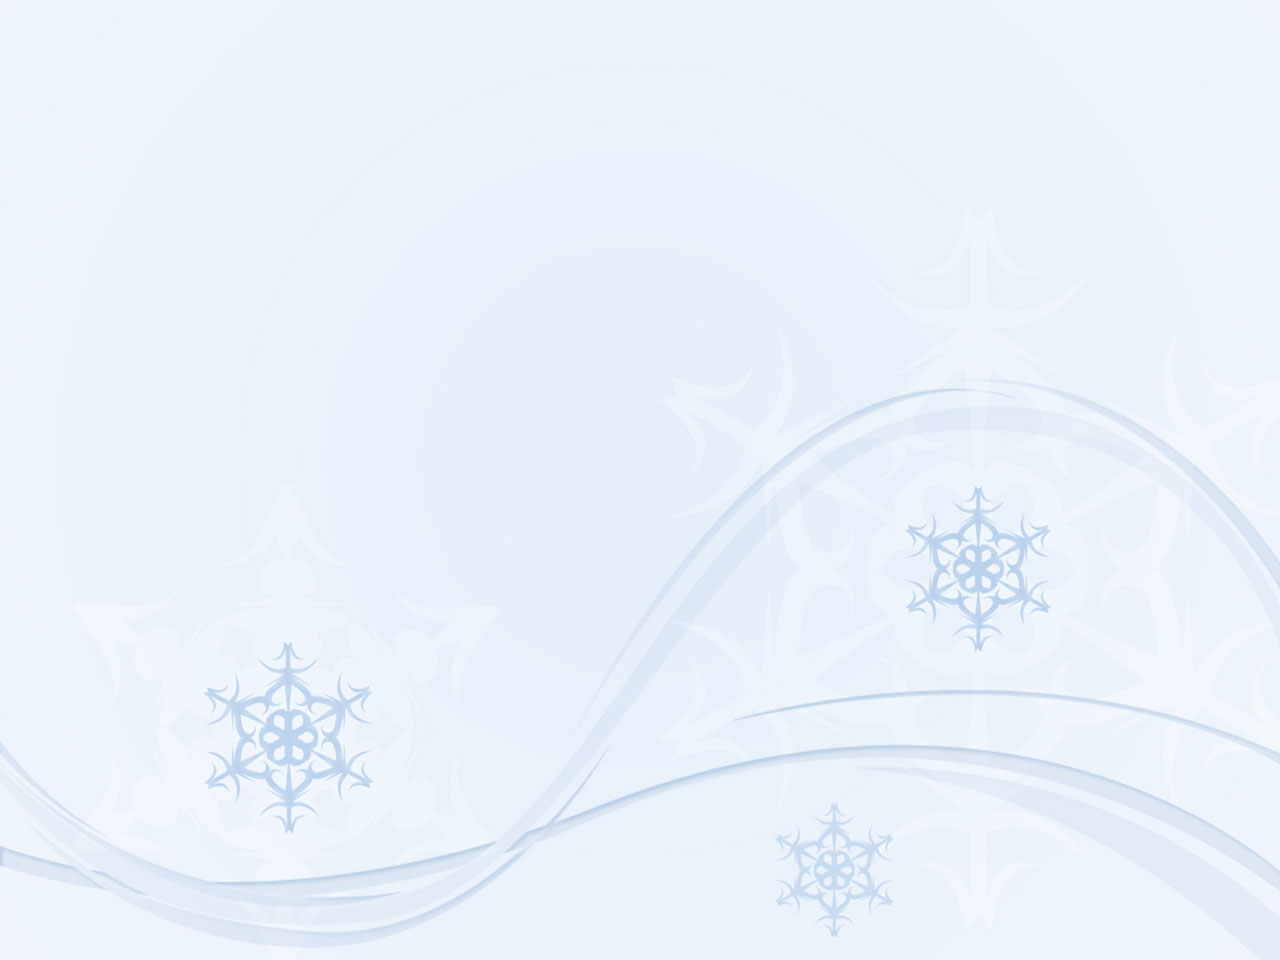 Light colored winter themed background.